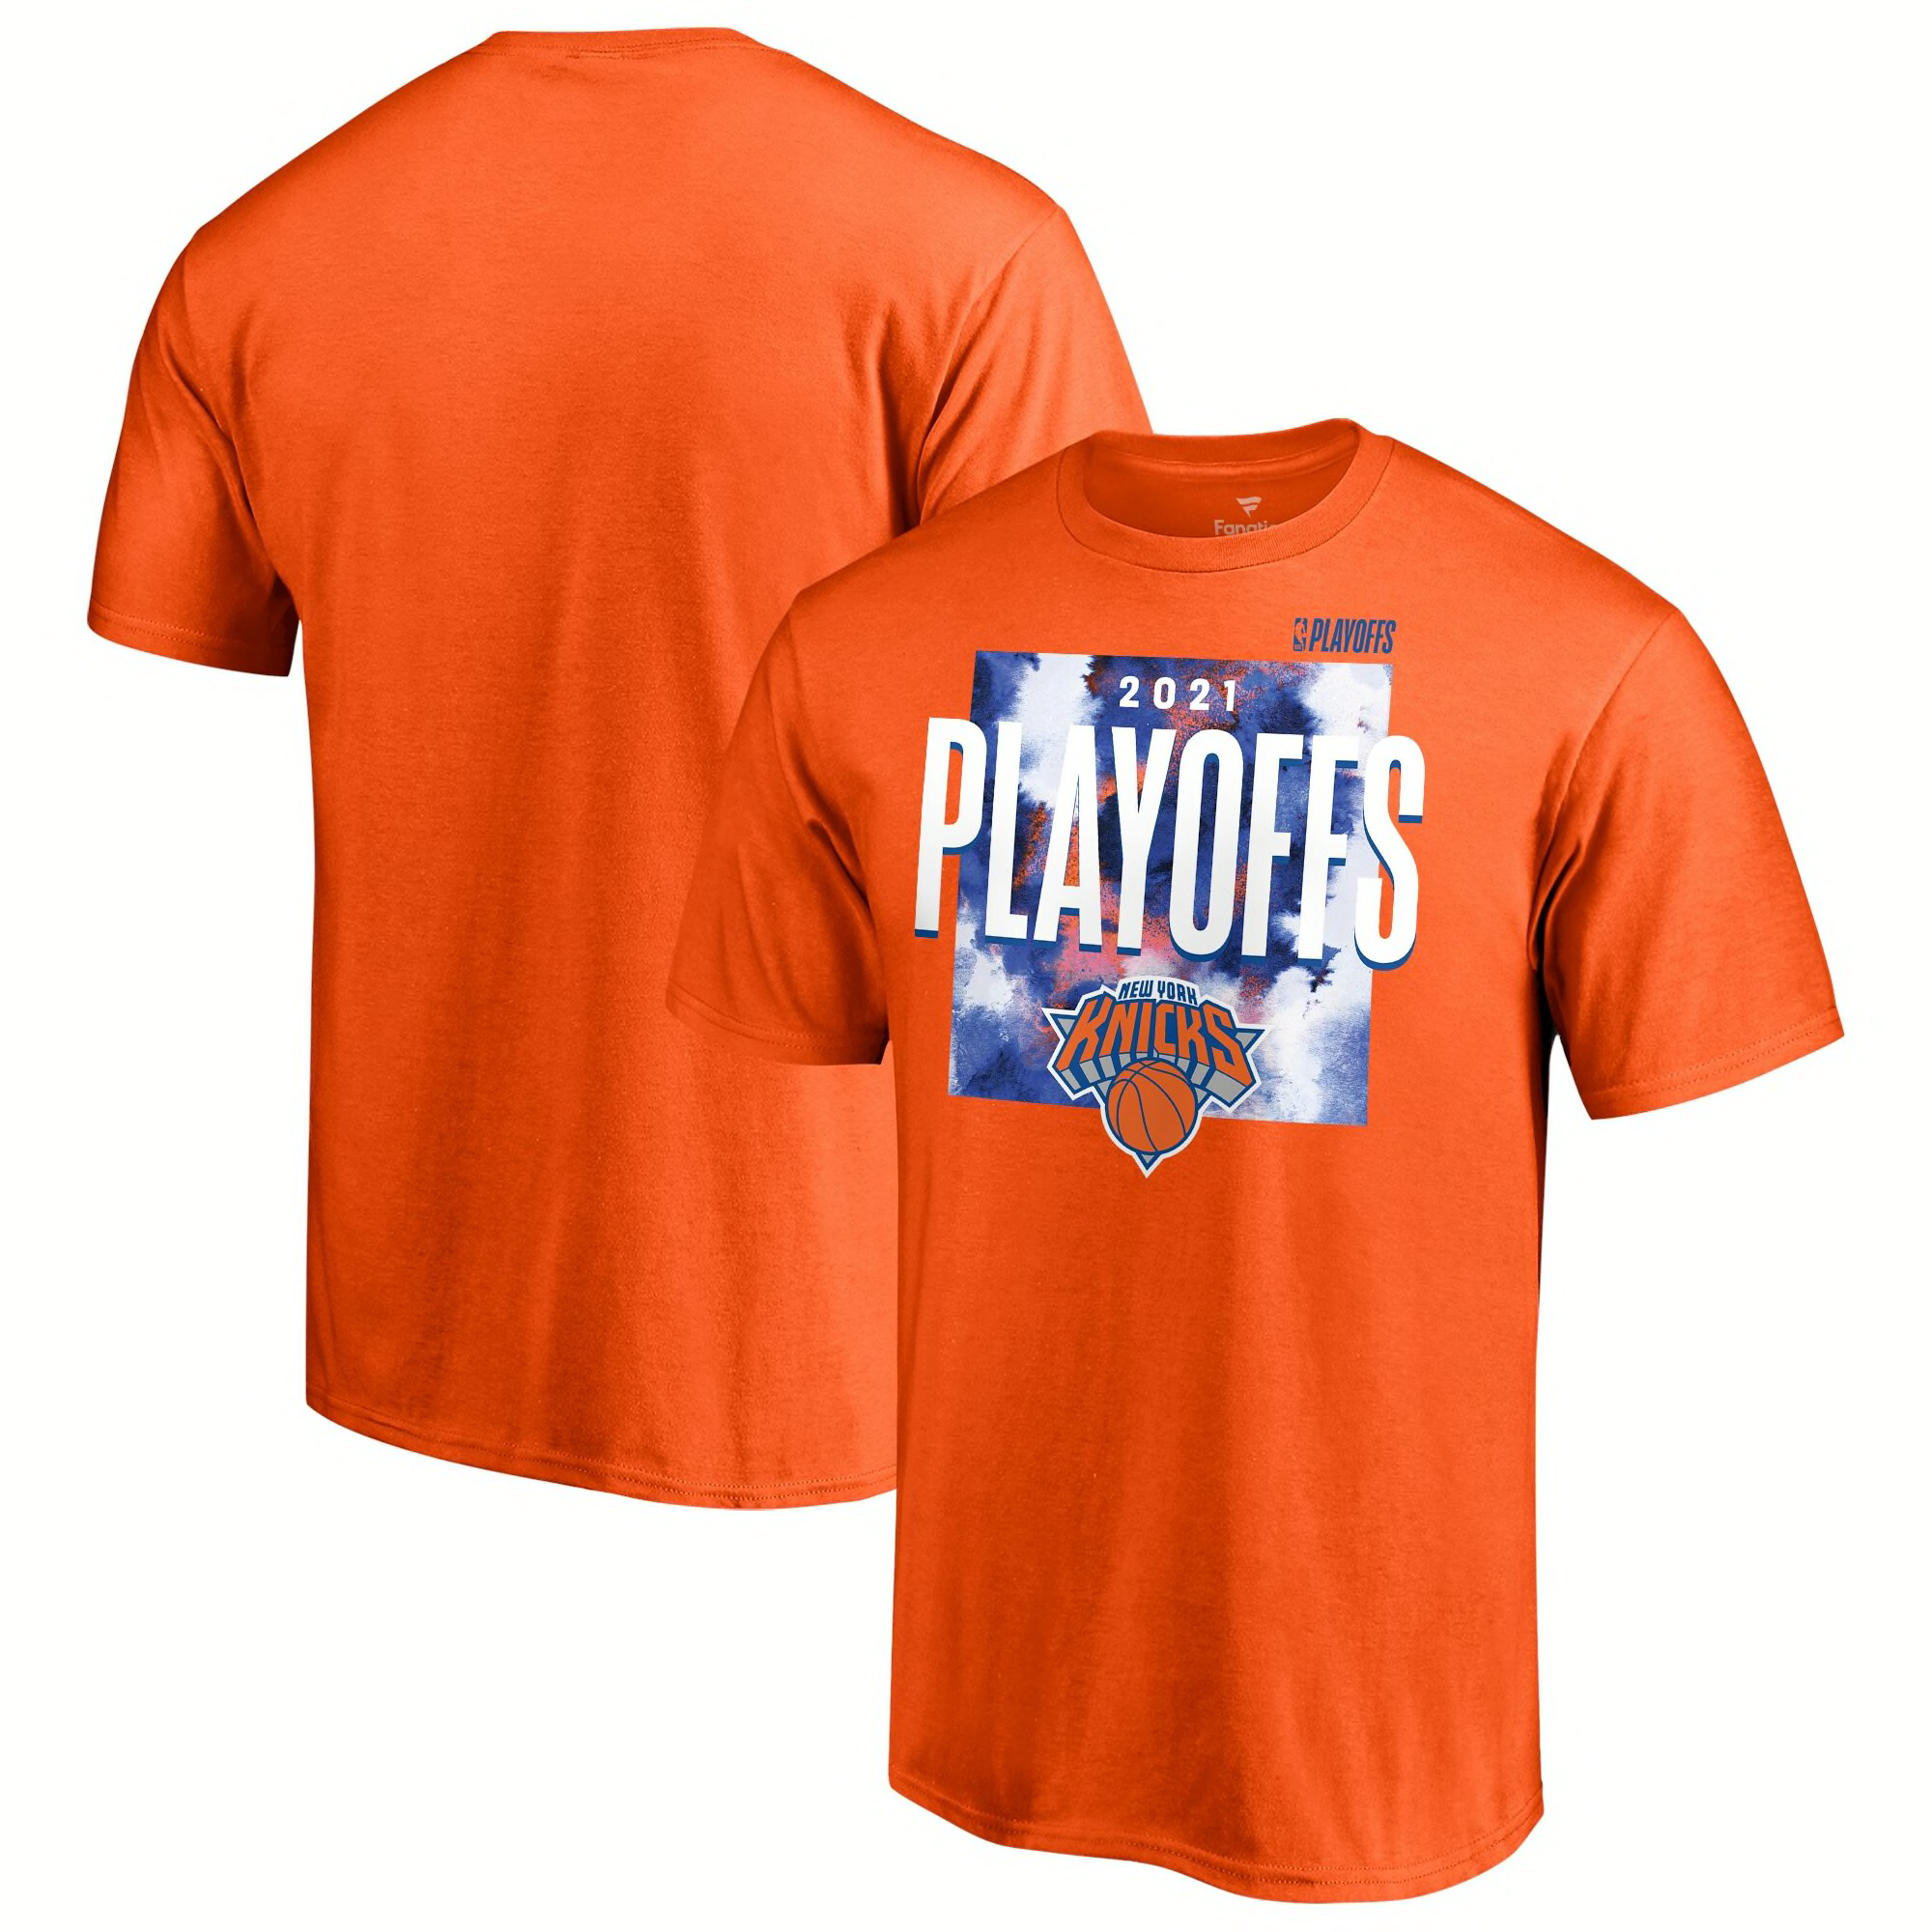 Where to buy Heat & Knicks NBA playoffs gear, including iconic 'Himmy  Buckets' shirt